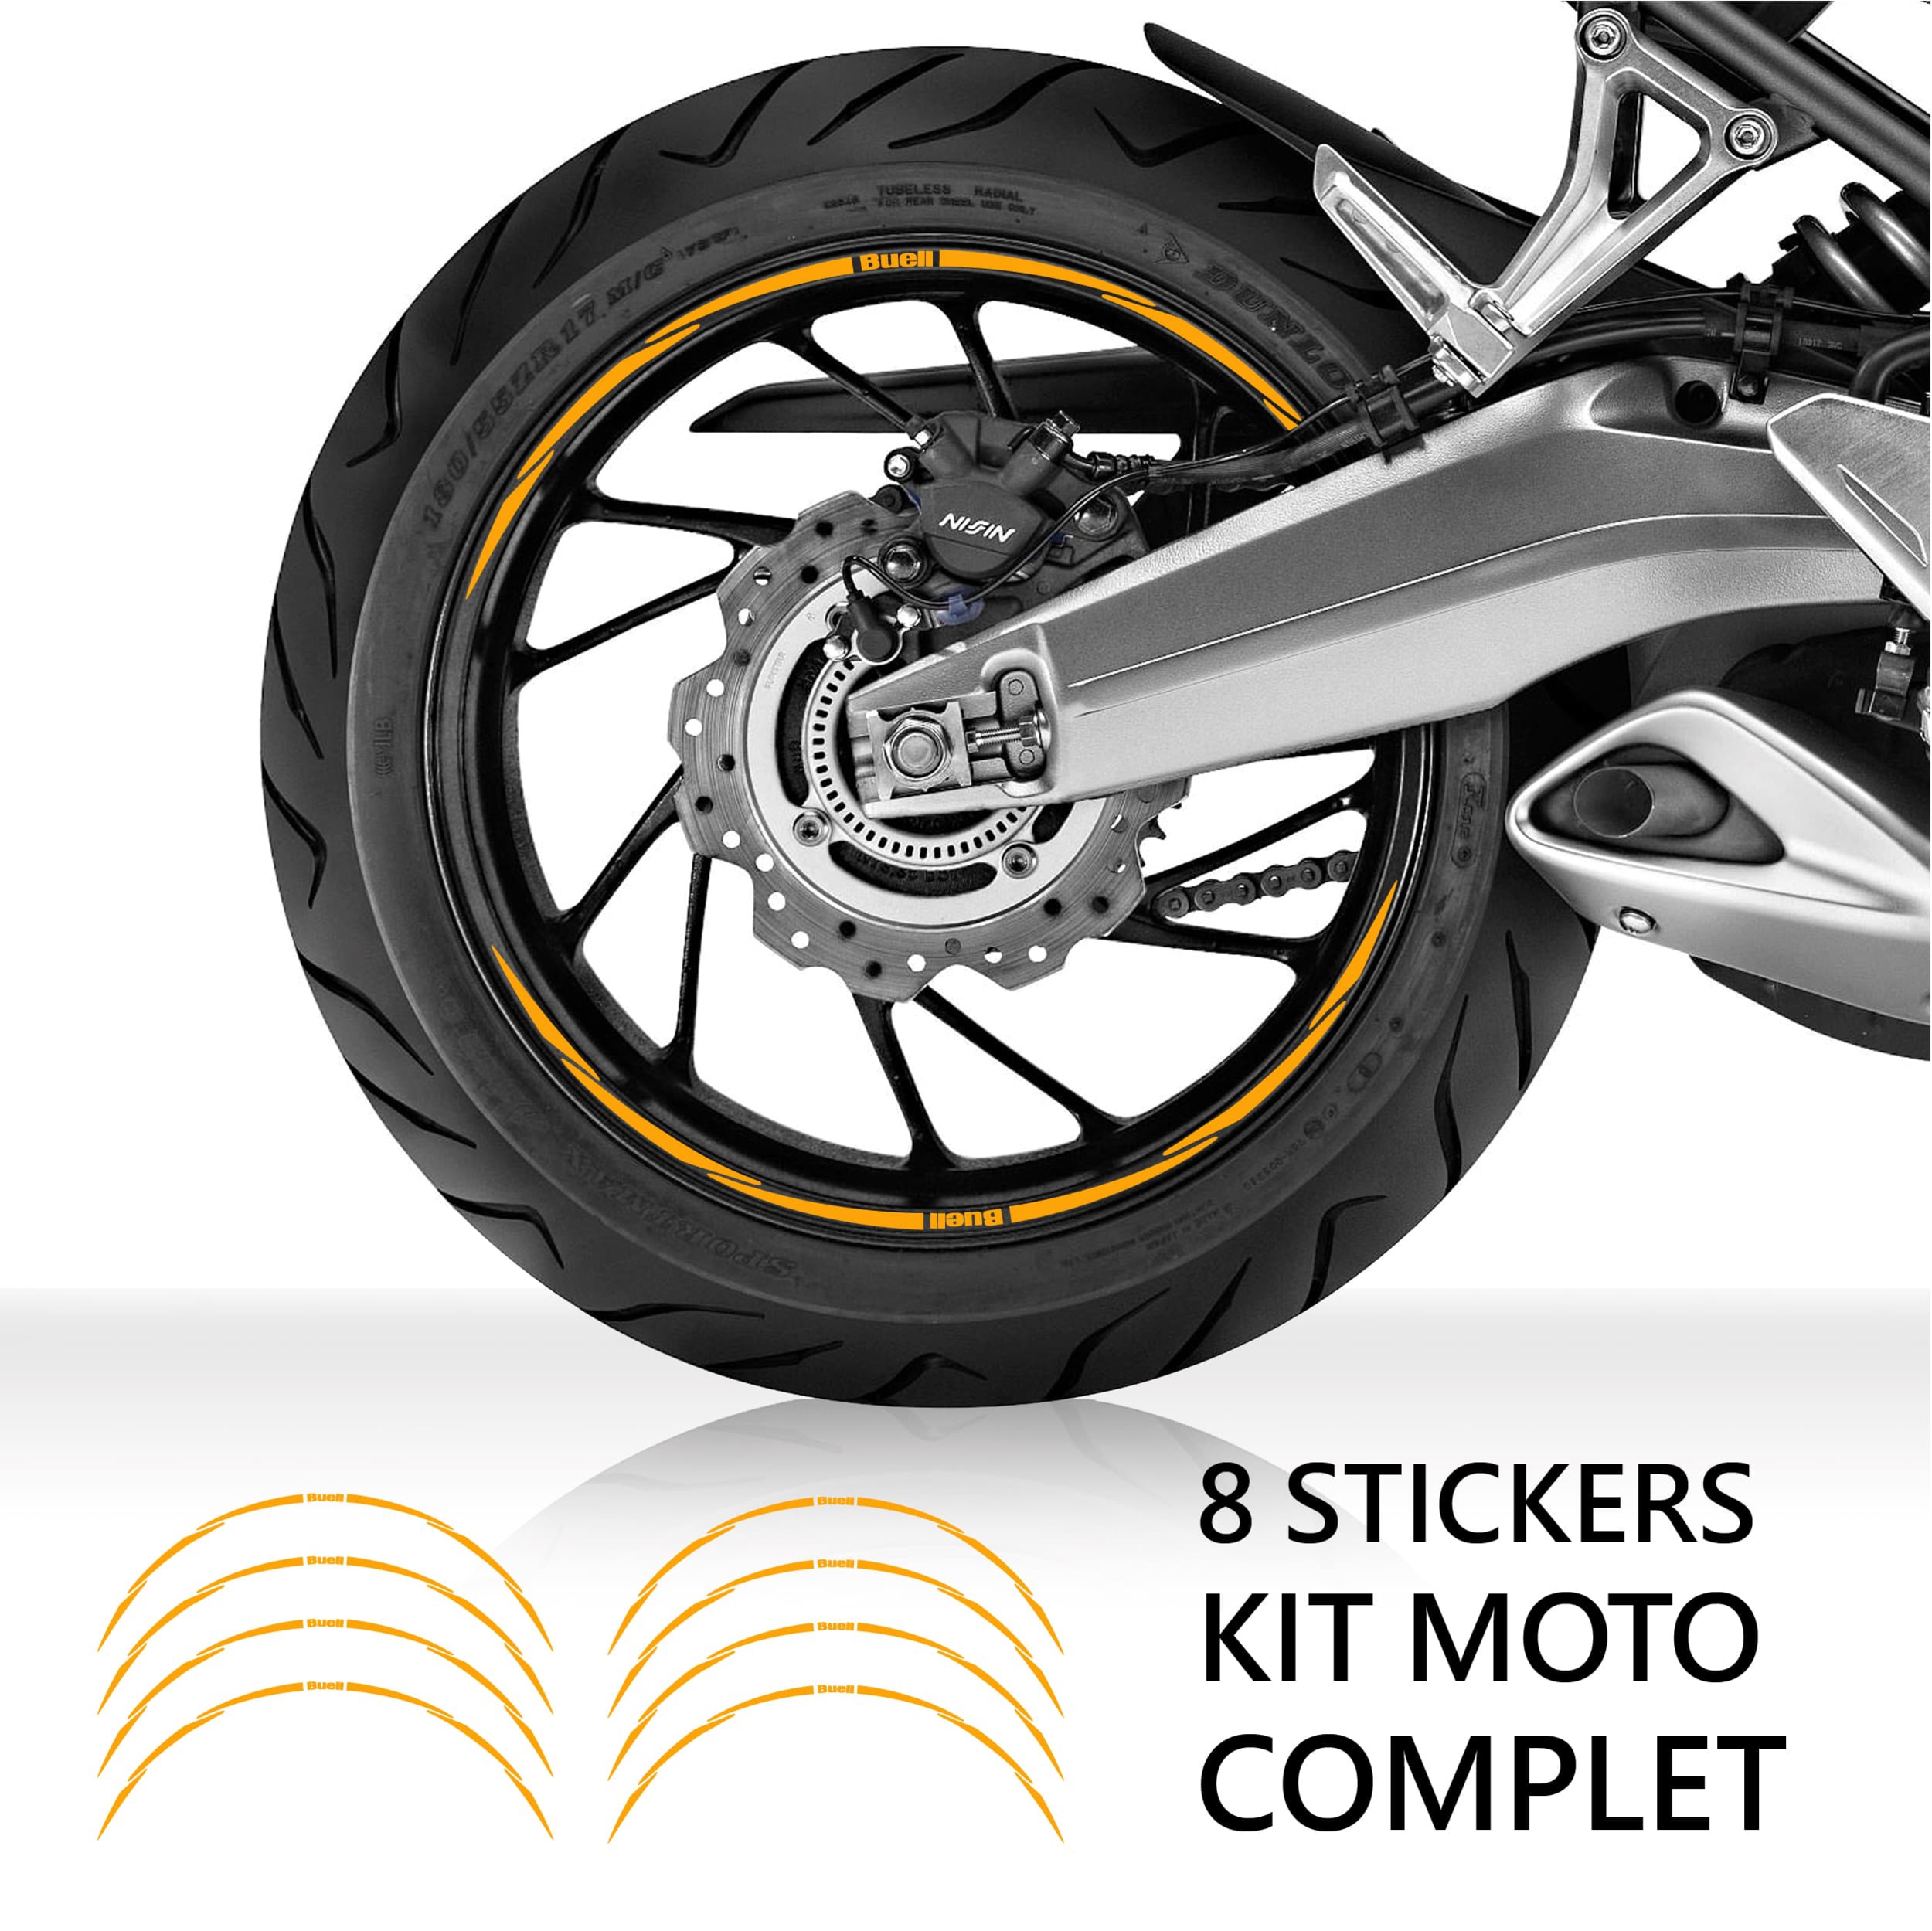 Liseret-jante-moto-buell-ref2-stickers-autocollant-roue-scooter-kit-deco-courbe-velo-adhesif-min